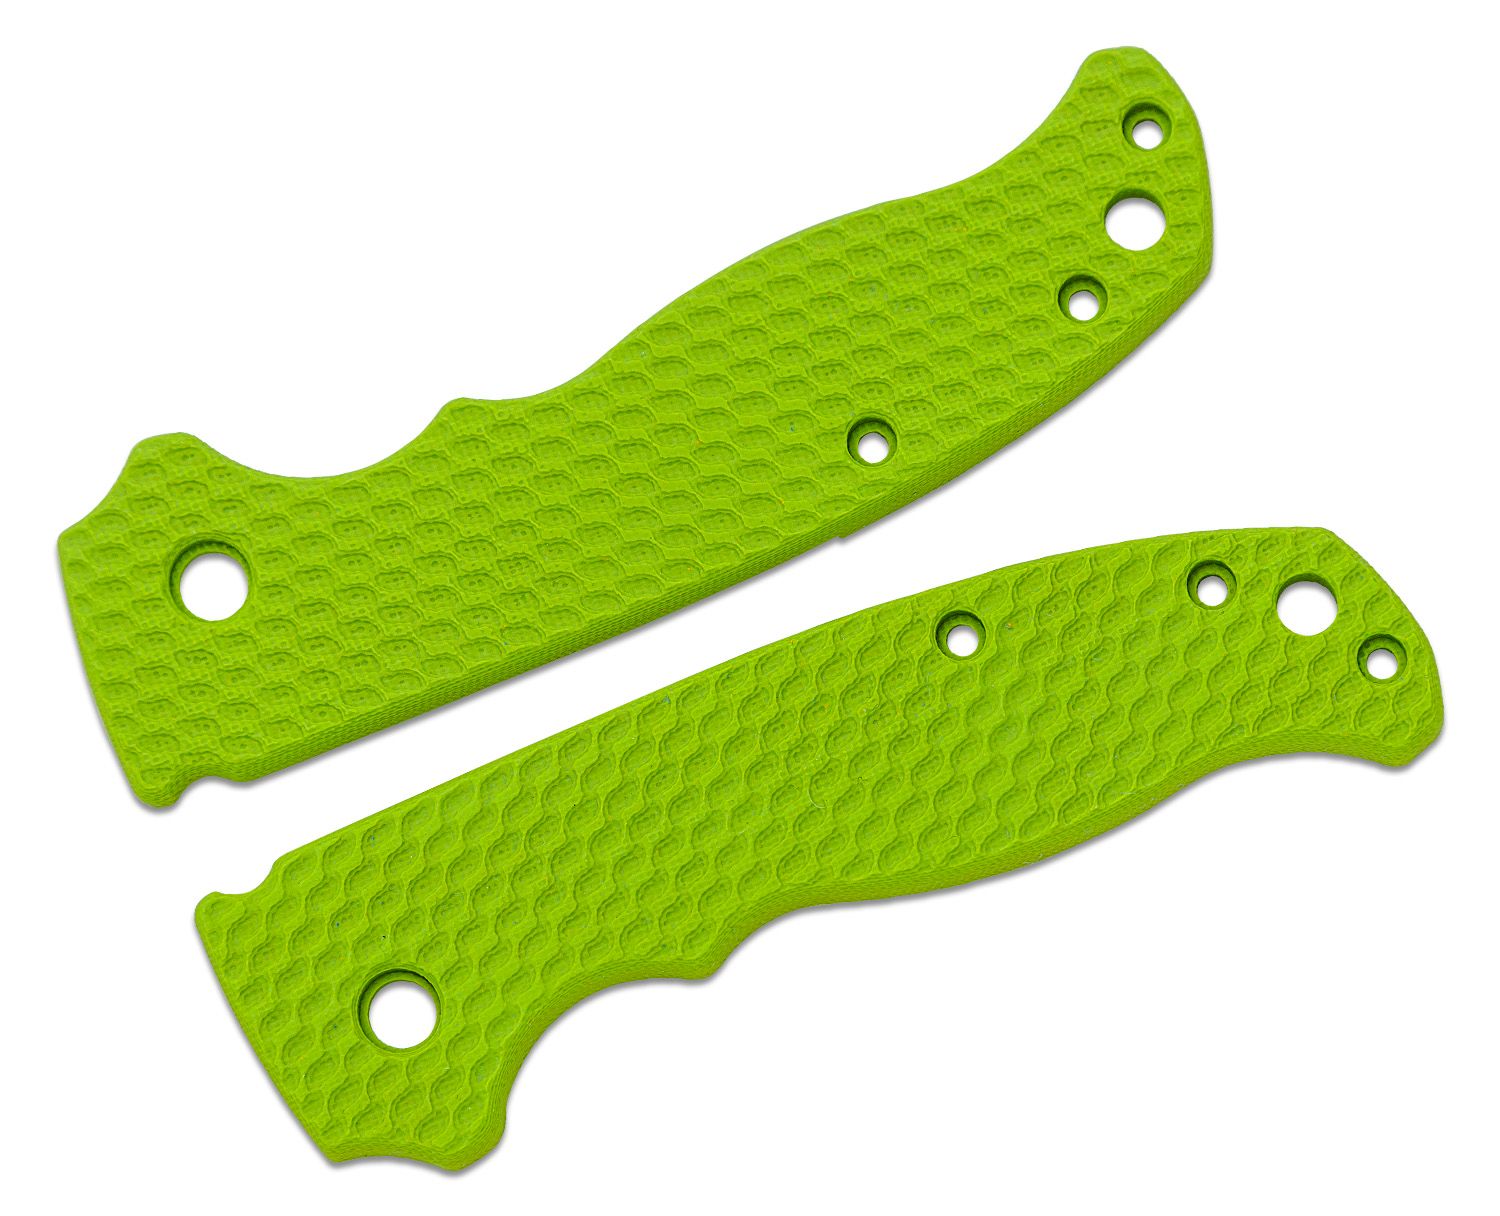 Flytanium Wavelength Lime Green G10 Scales for Demko AD20.5, Knife 